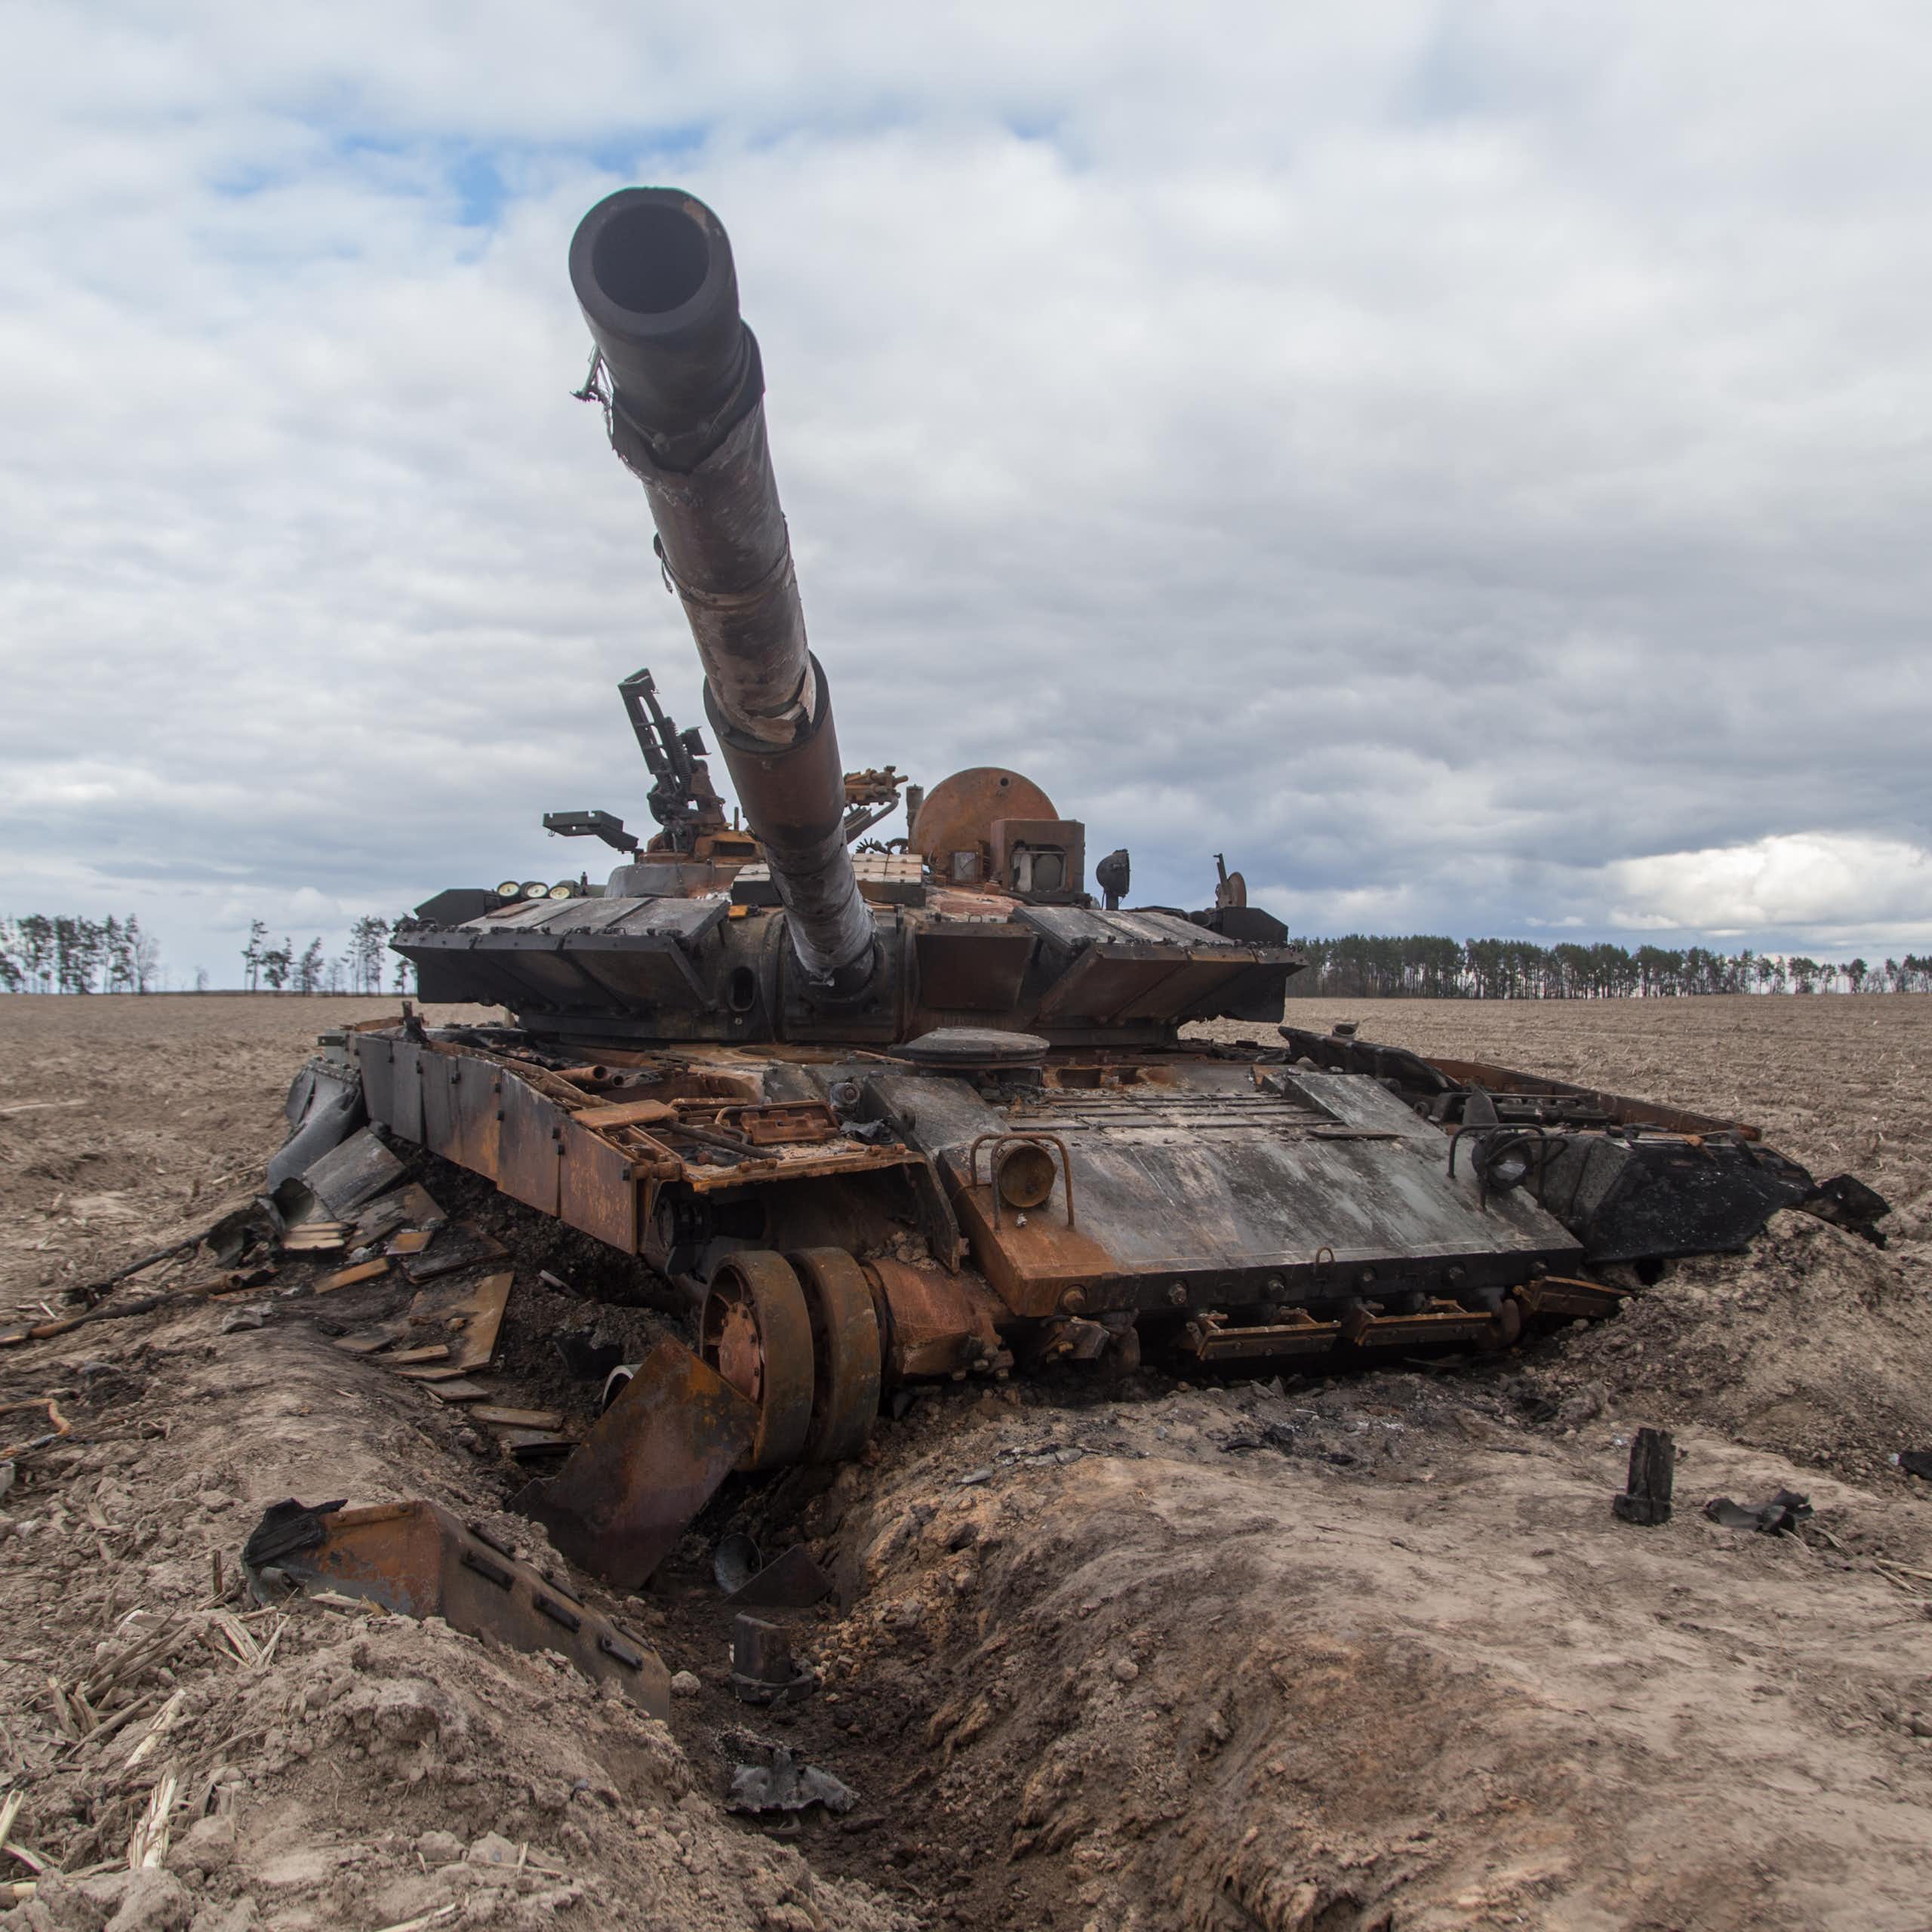 A destroyed tank sat in the middle of a field.